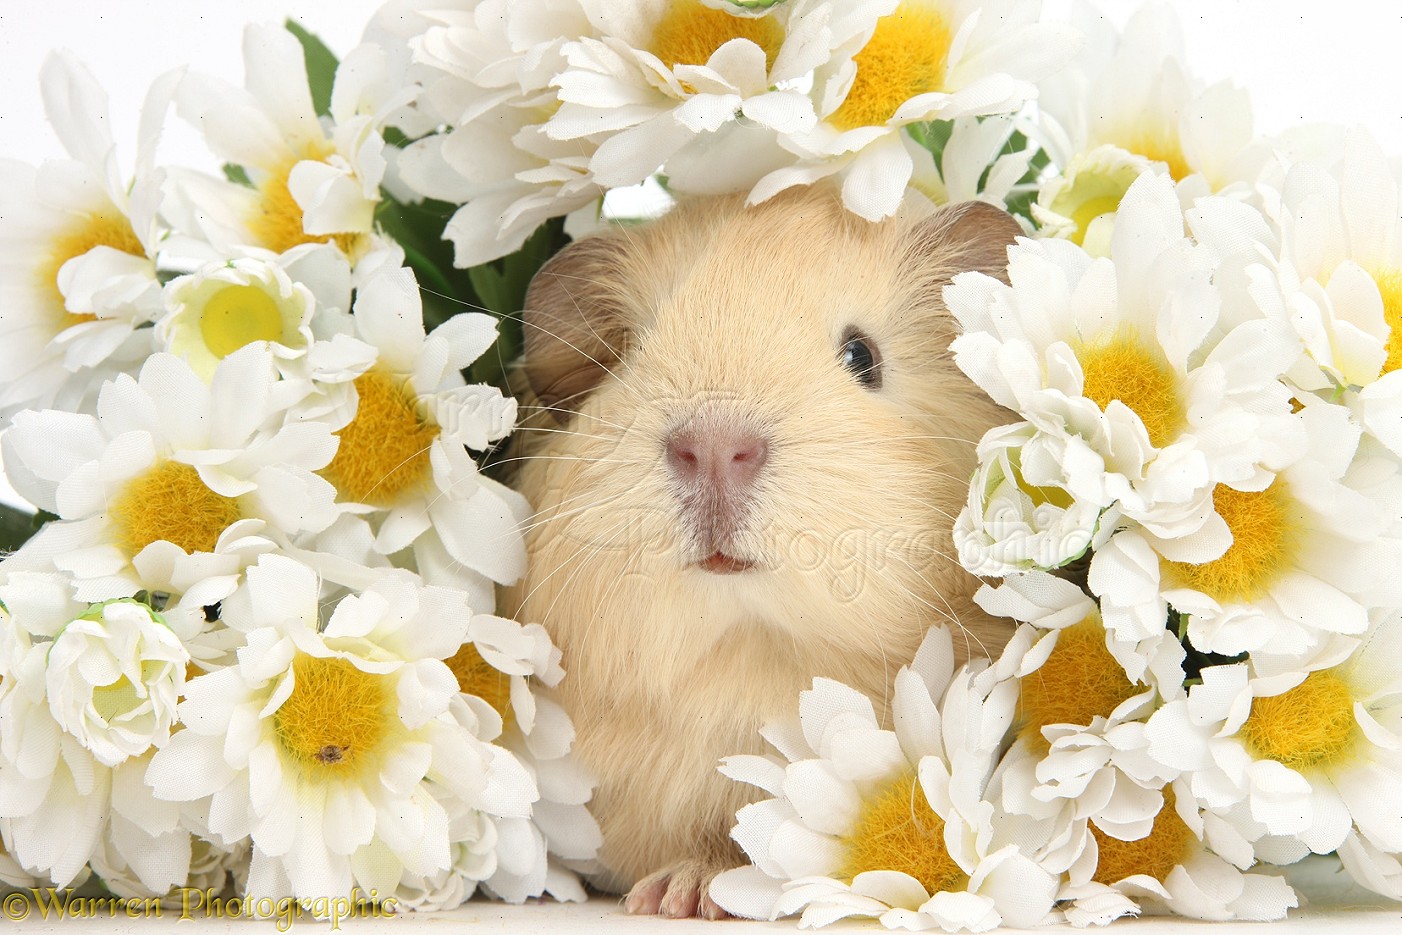 Free download WP38974 Cute baby yellow Guinea pig among daisy flowers [1402x935] for your Desktop, Mobile & Tablet. Explore Cute Guinea Pig Wallpaper. Christmas Guinea Pig Wallpaper, Guinea Pig Wallpaper